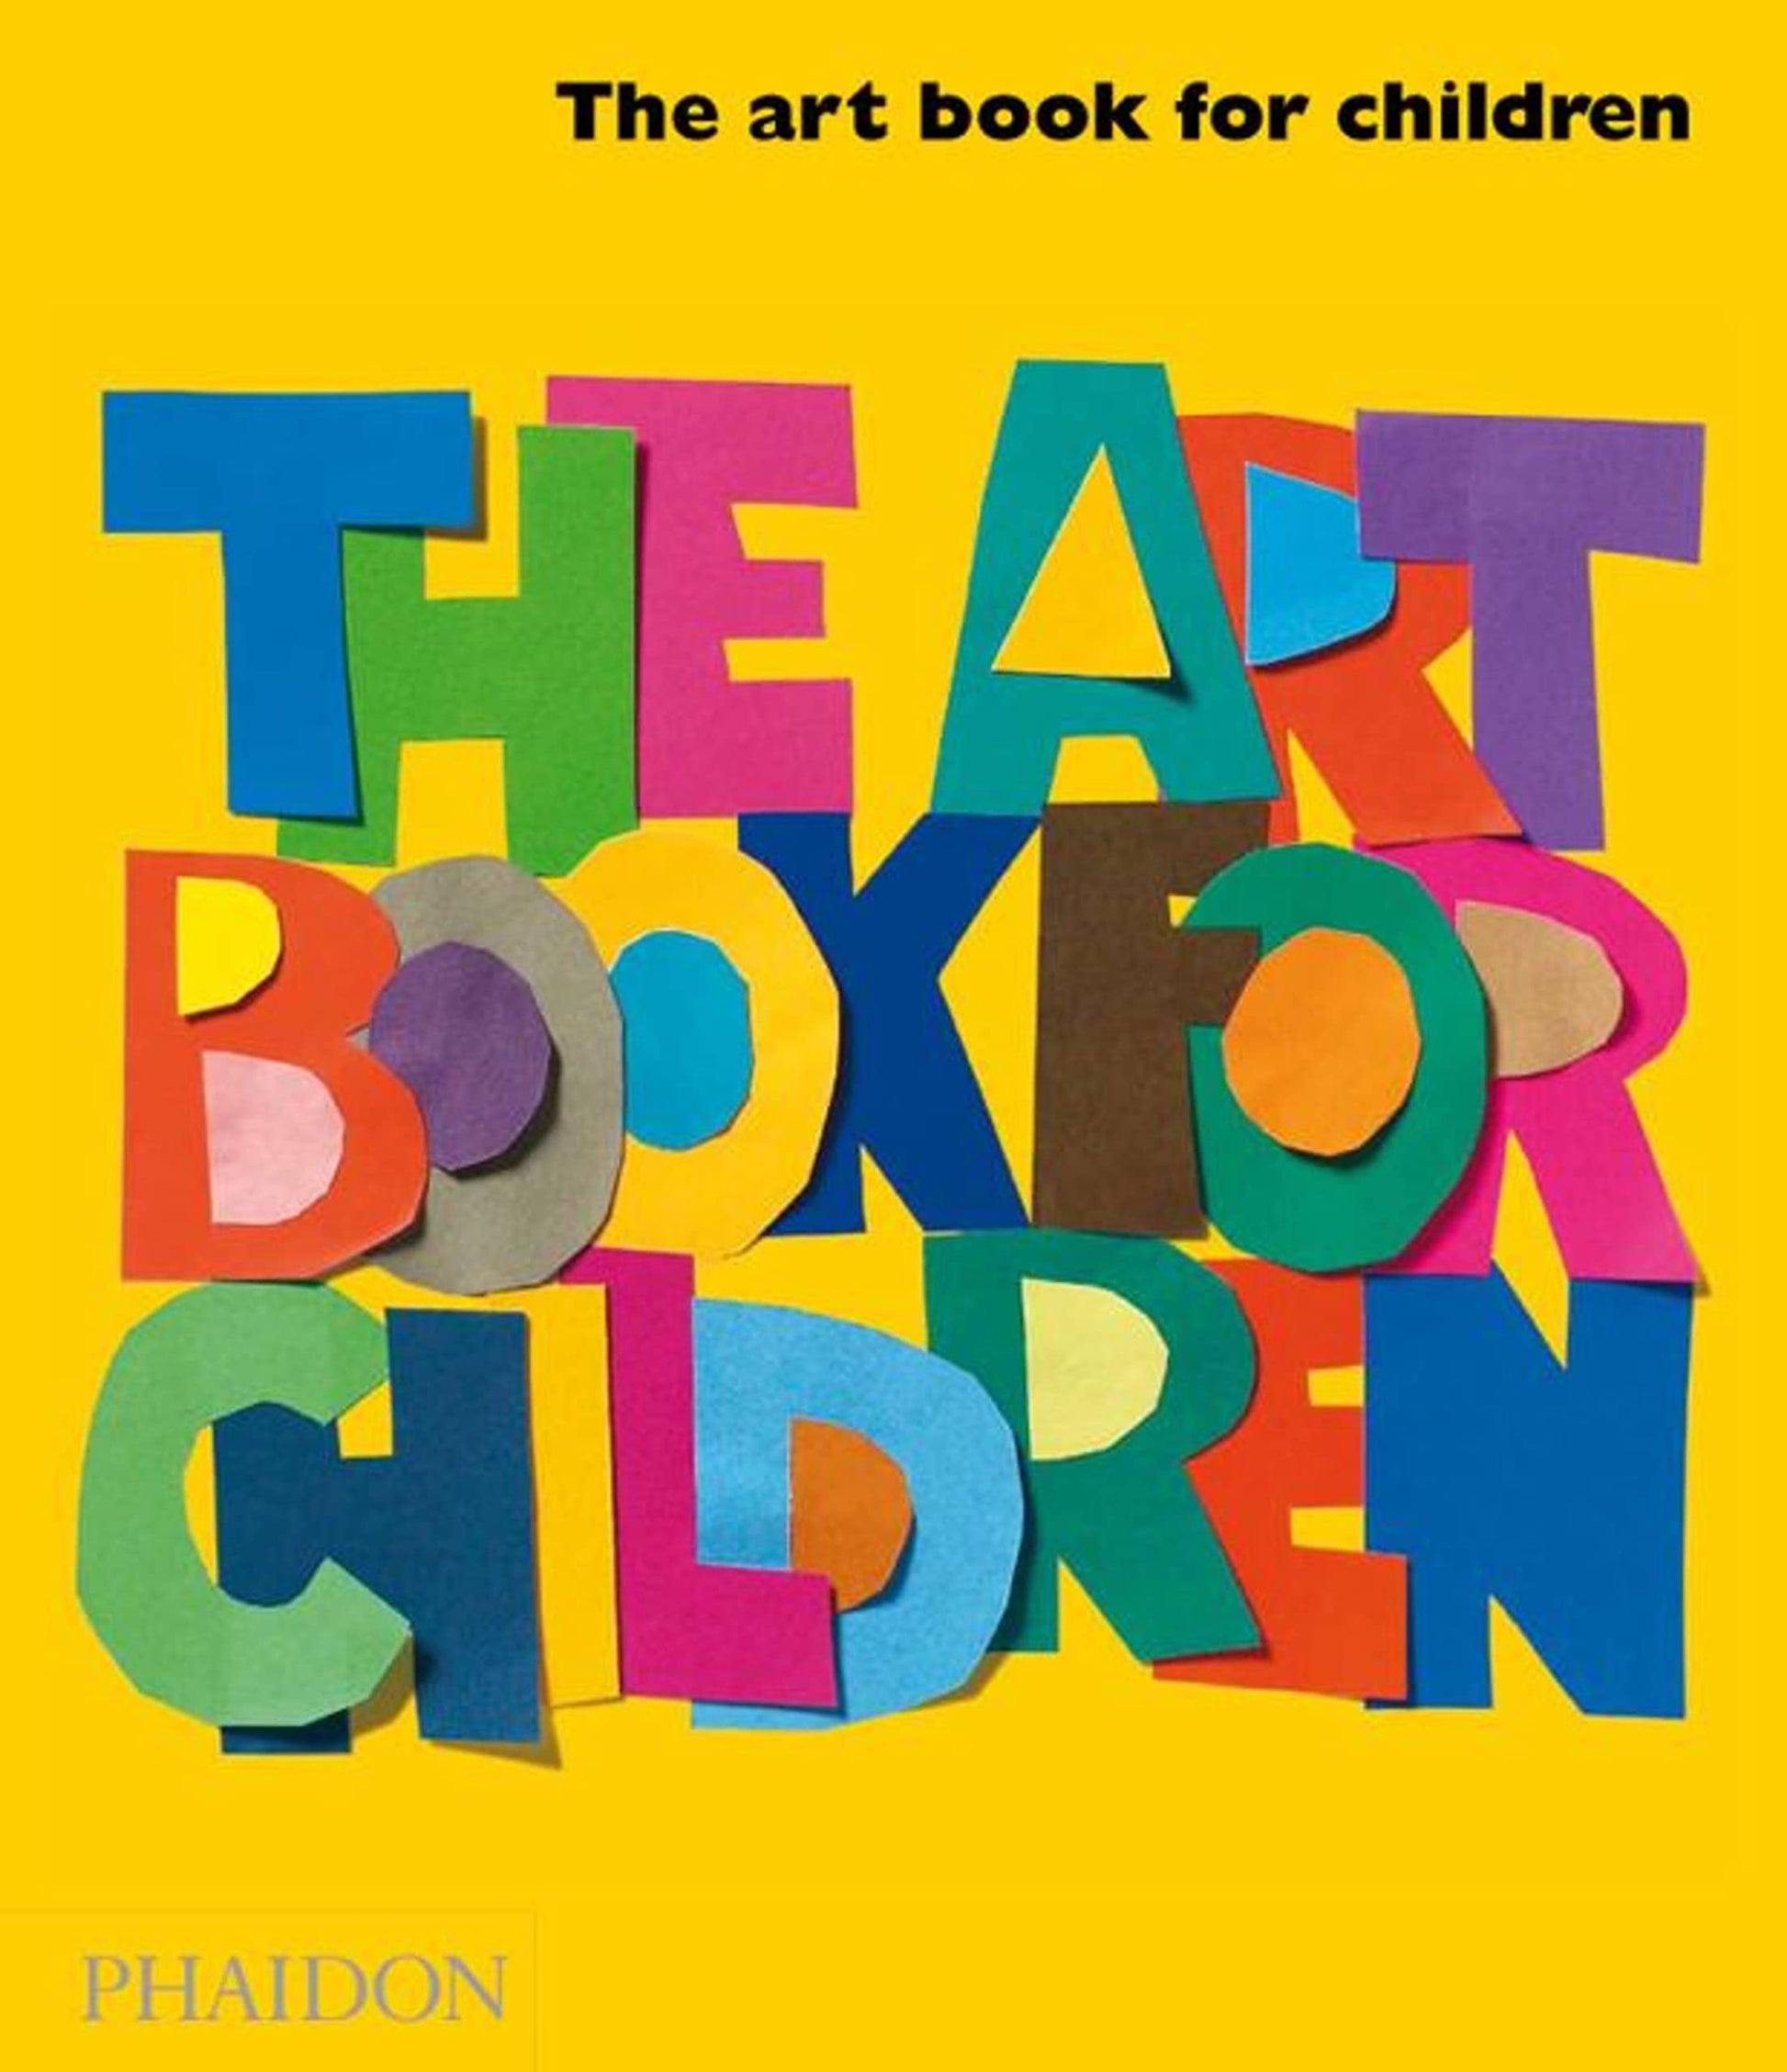 The Art Book For Children by Phaidon available at Chapters online bookstore in Pakistan